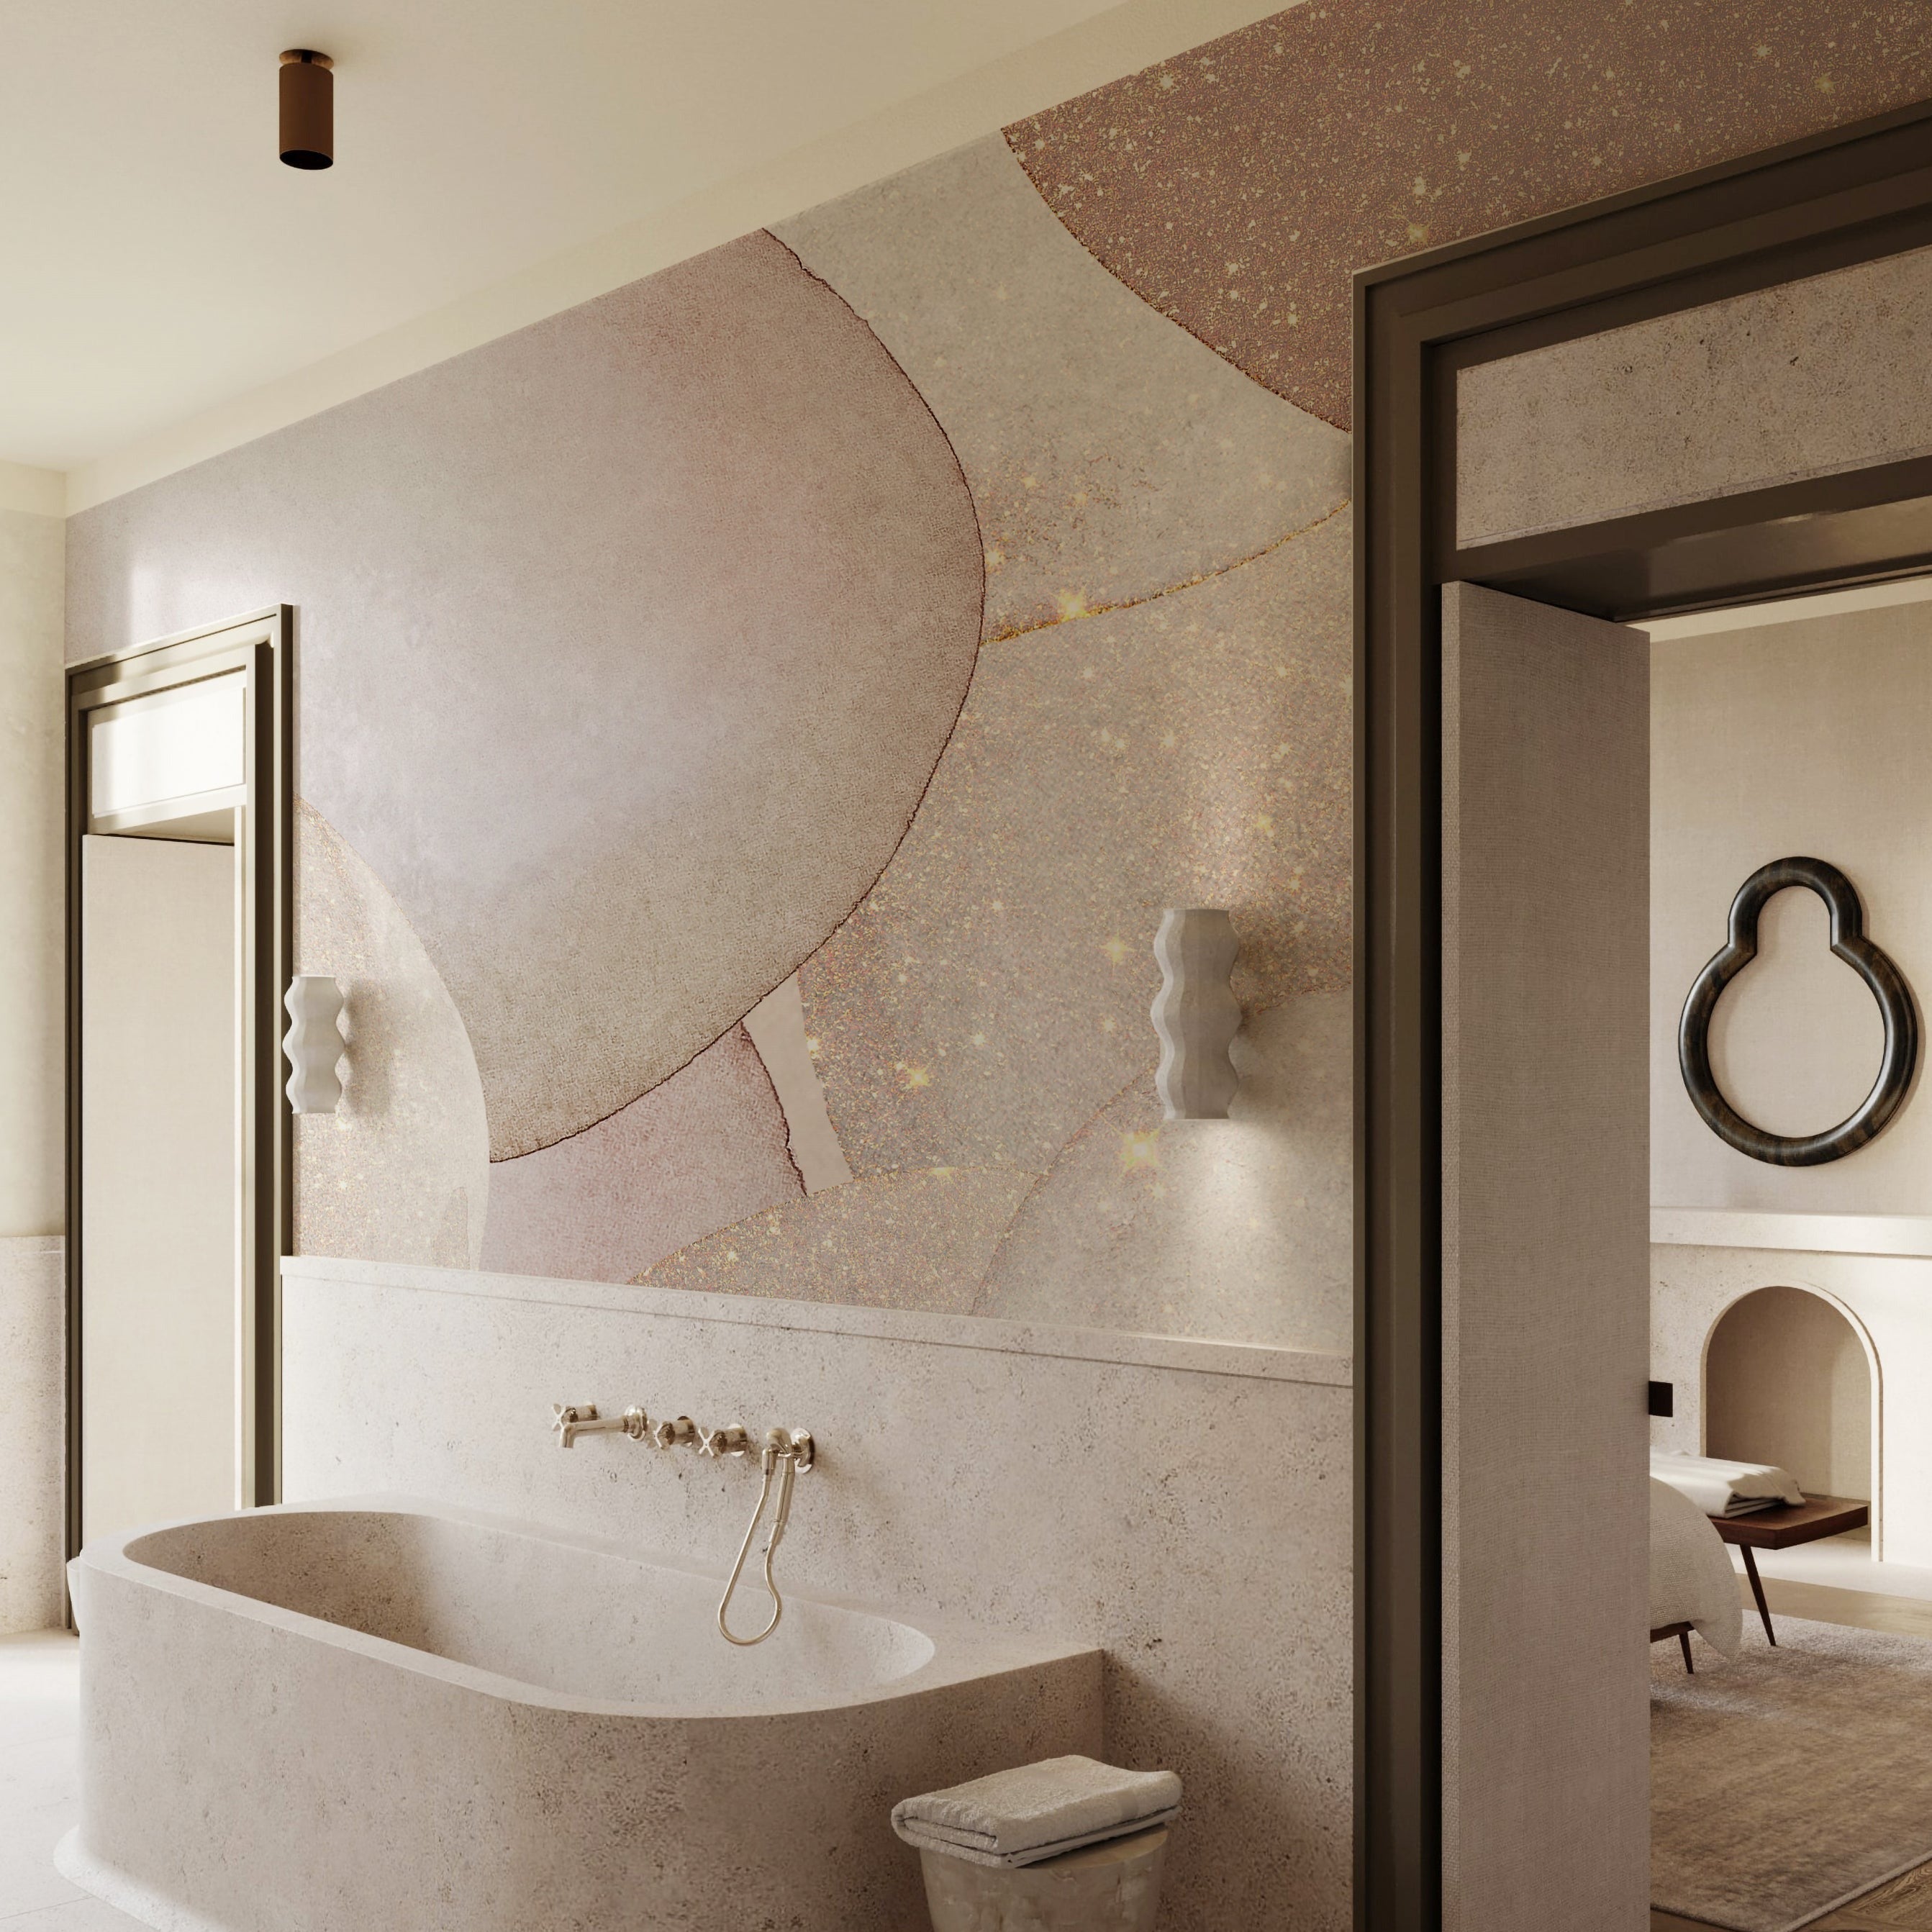 Luxury Watercolor Wall Mural Wallpaper in a modern bathroom setting, showcasing abstract watercolor shapes in pink and beige with gold highlights, creating a sophisticated and calming ambiance.